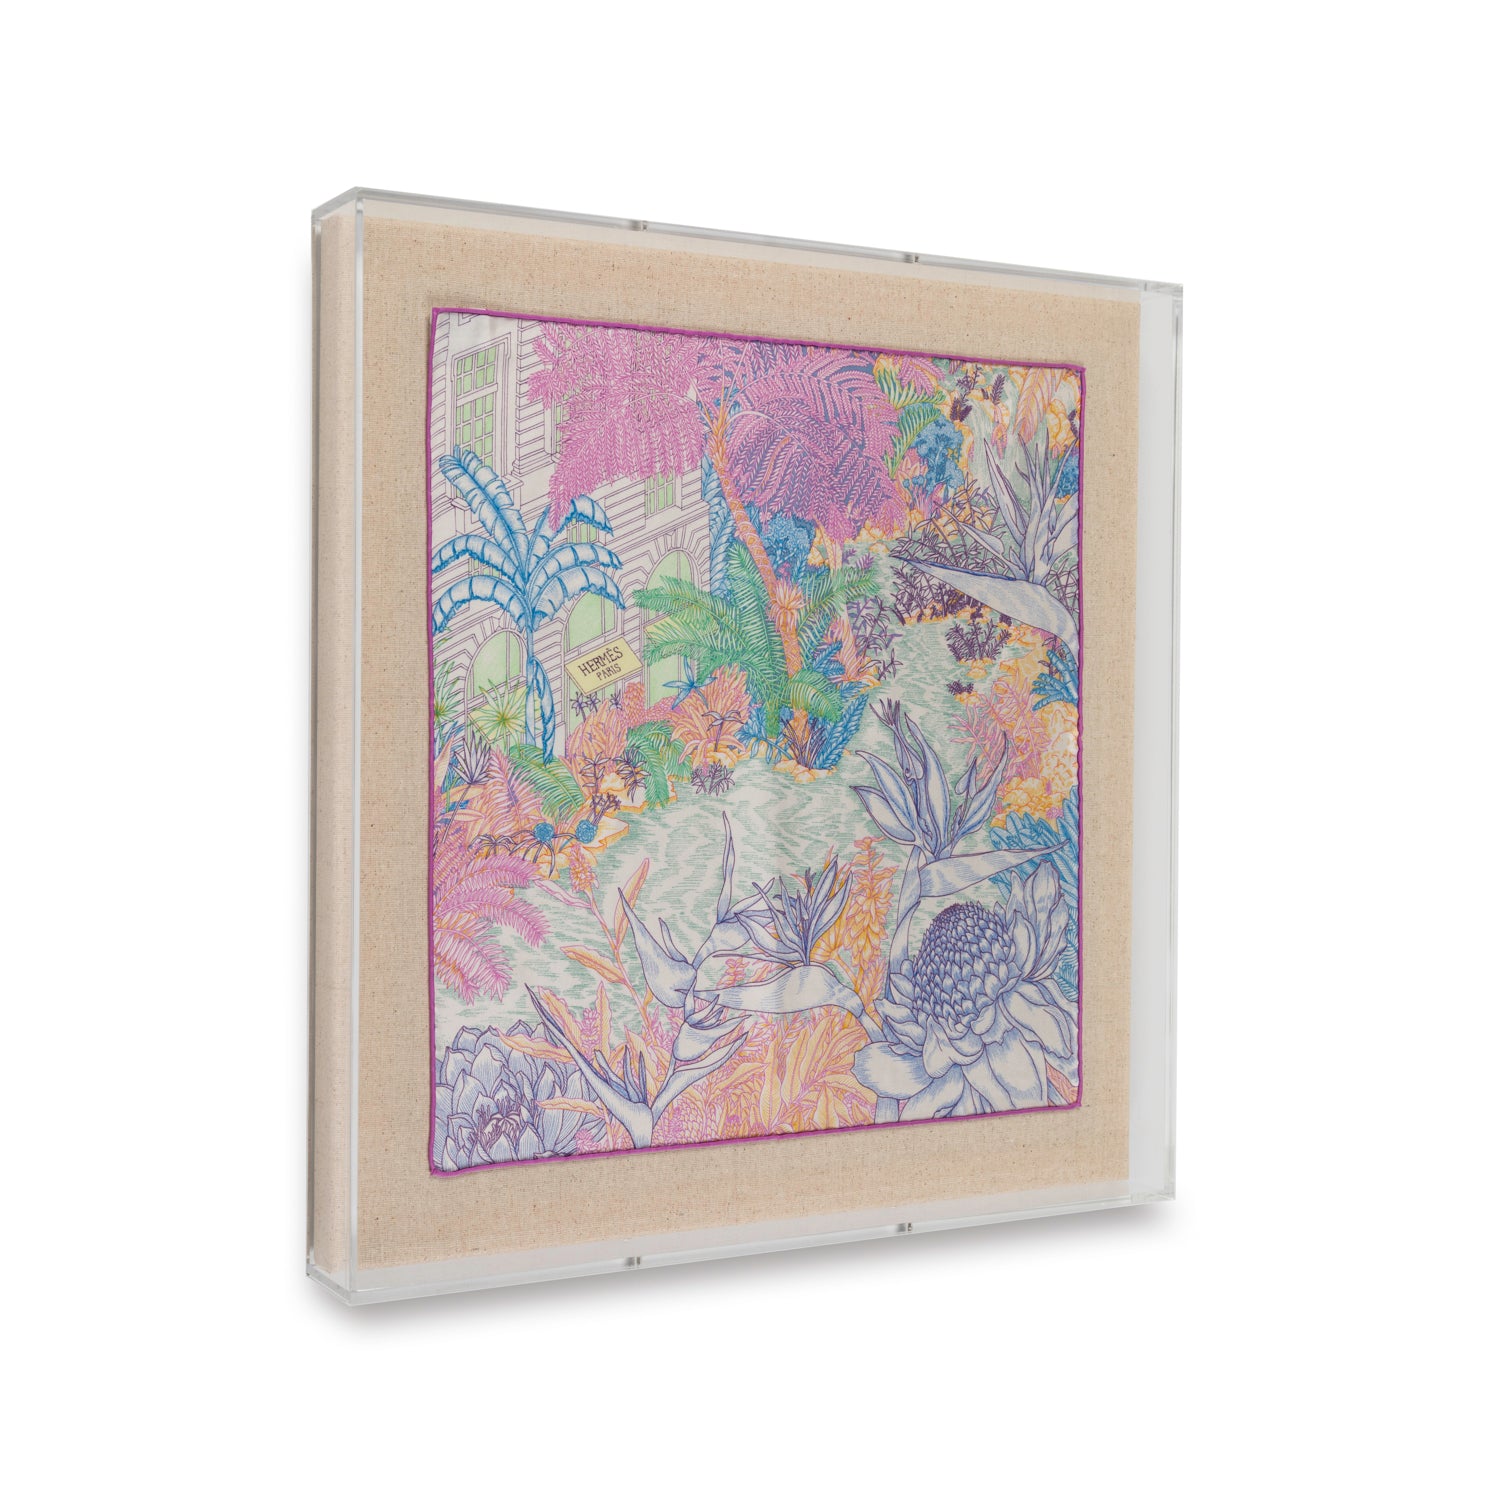 Framelines Gallery - Hermes Silk Scarf A delicate piece of Art,  enhancing your wall decor with customised framework. #hermes #silk #scarf  #luxury #gift #wallart #walldecor #frame #framing #framework #custom  #customart #customised #beloud